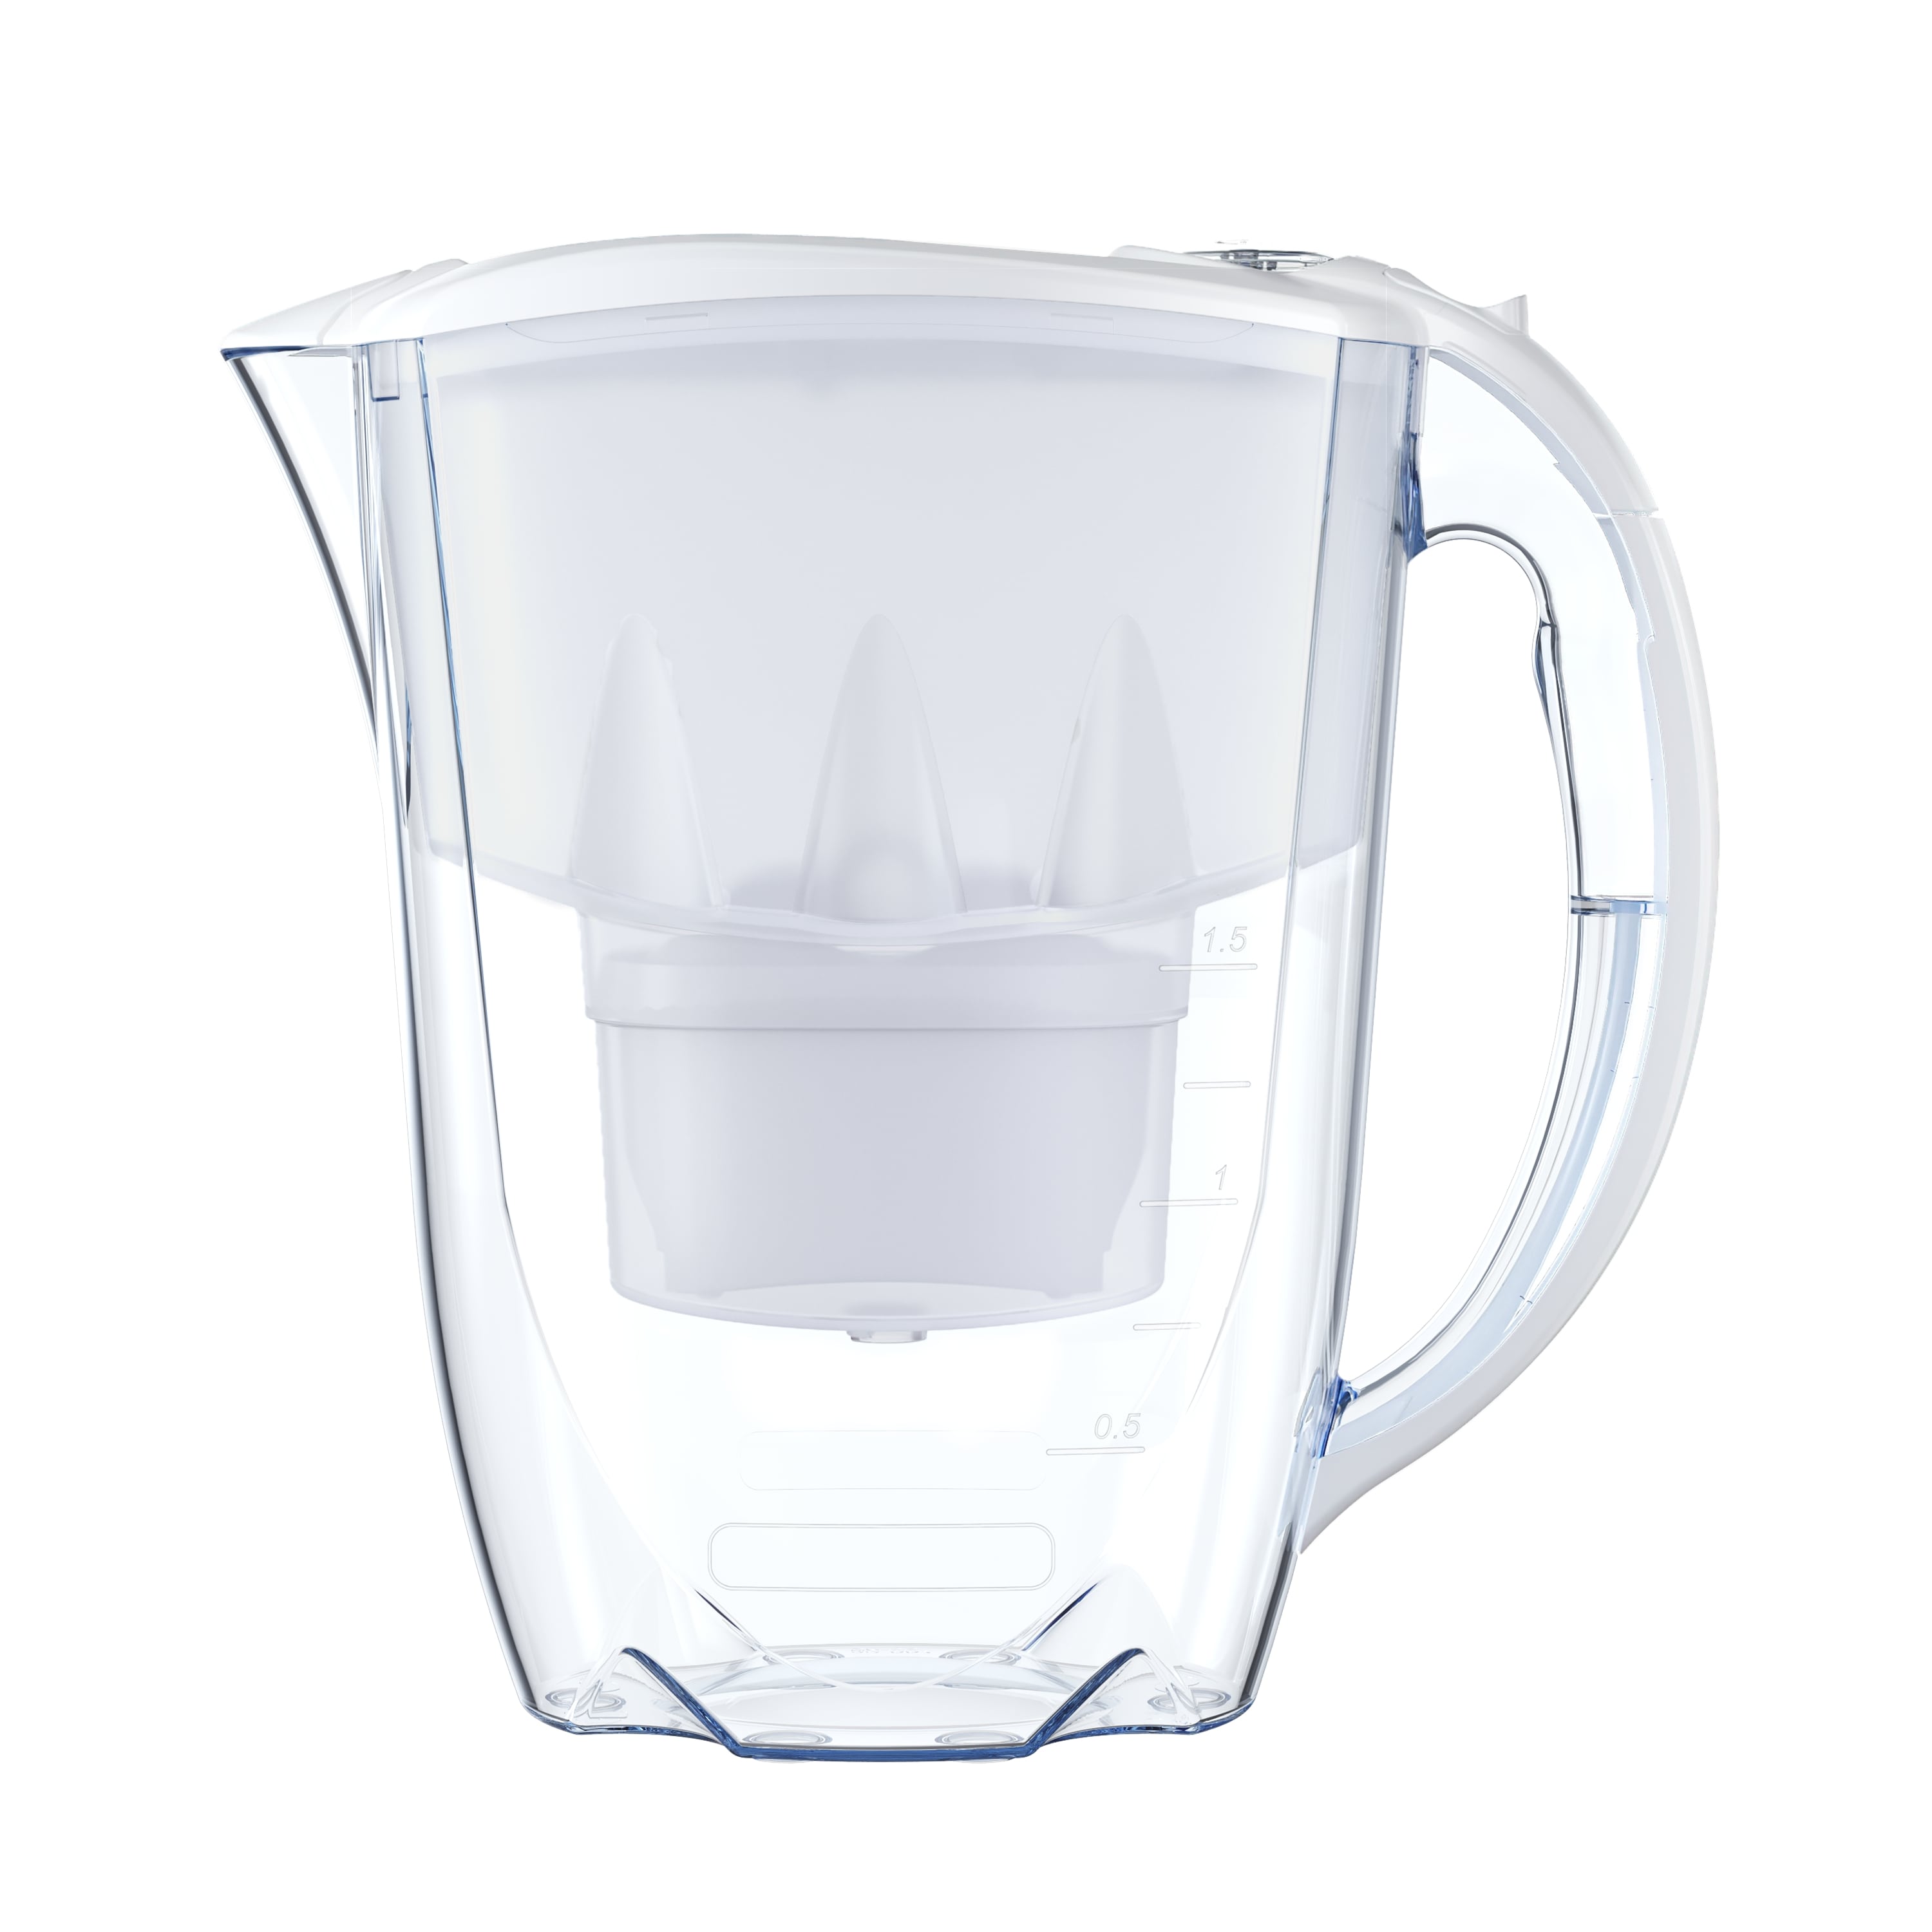 Brita MAXPRO 3 Pack Limescale Expert - Home Store + More